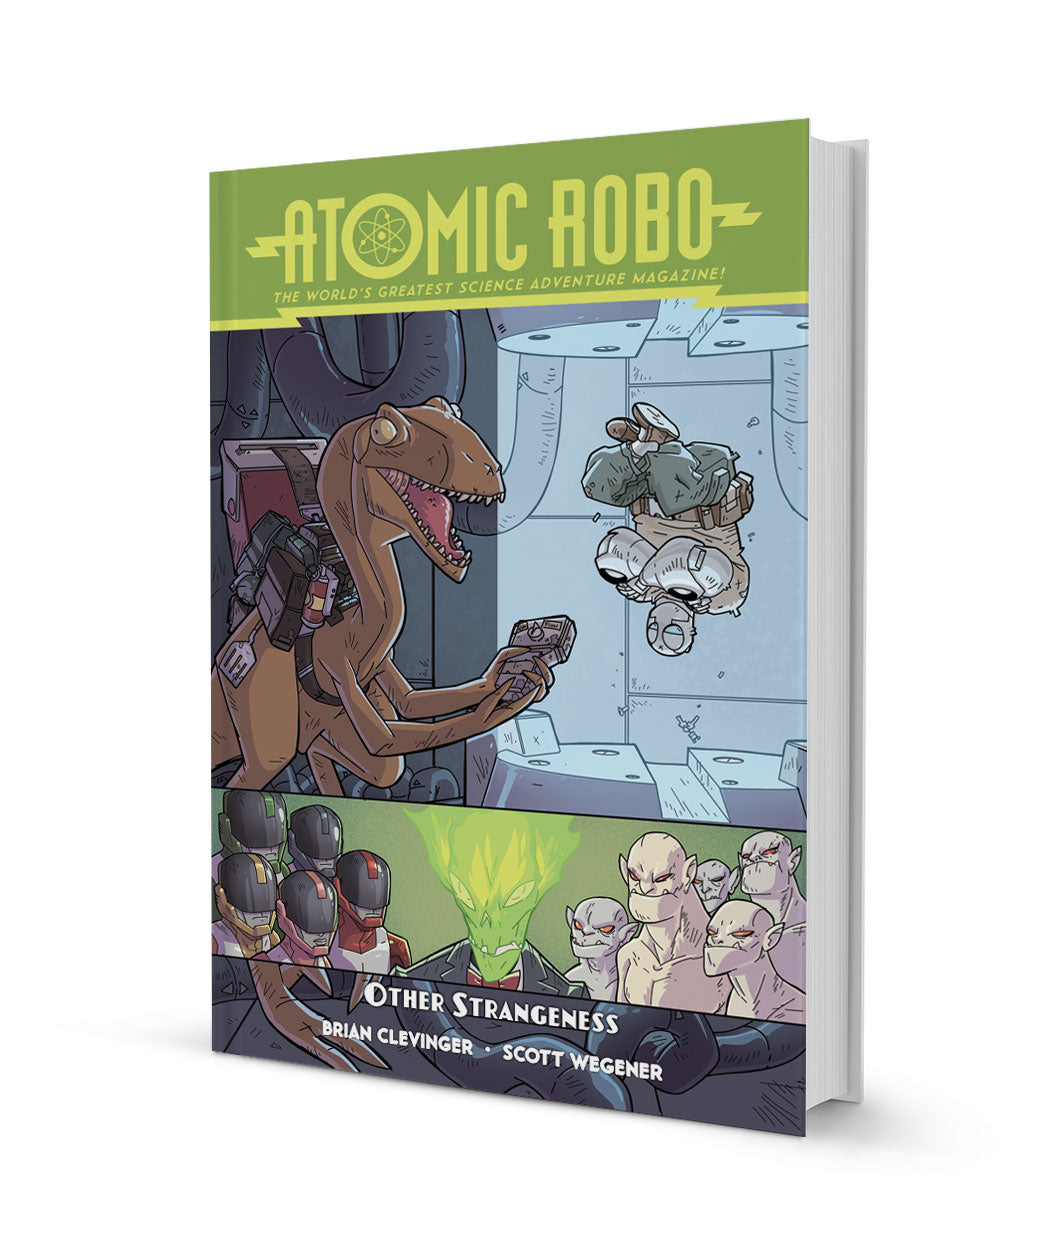 Atomic Robo and Other Strangeness